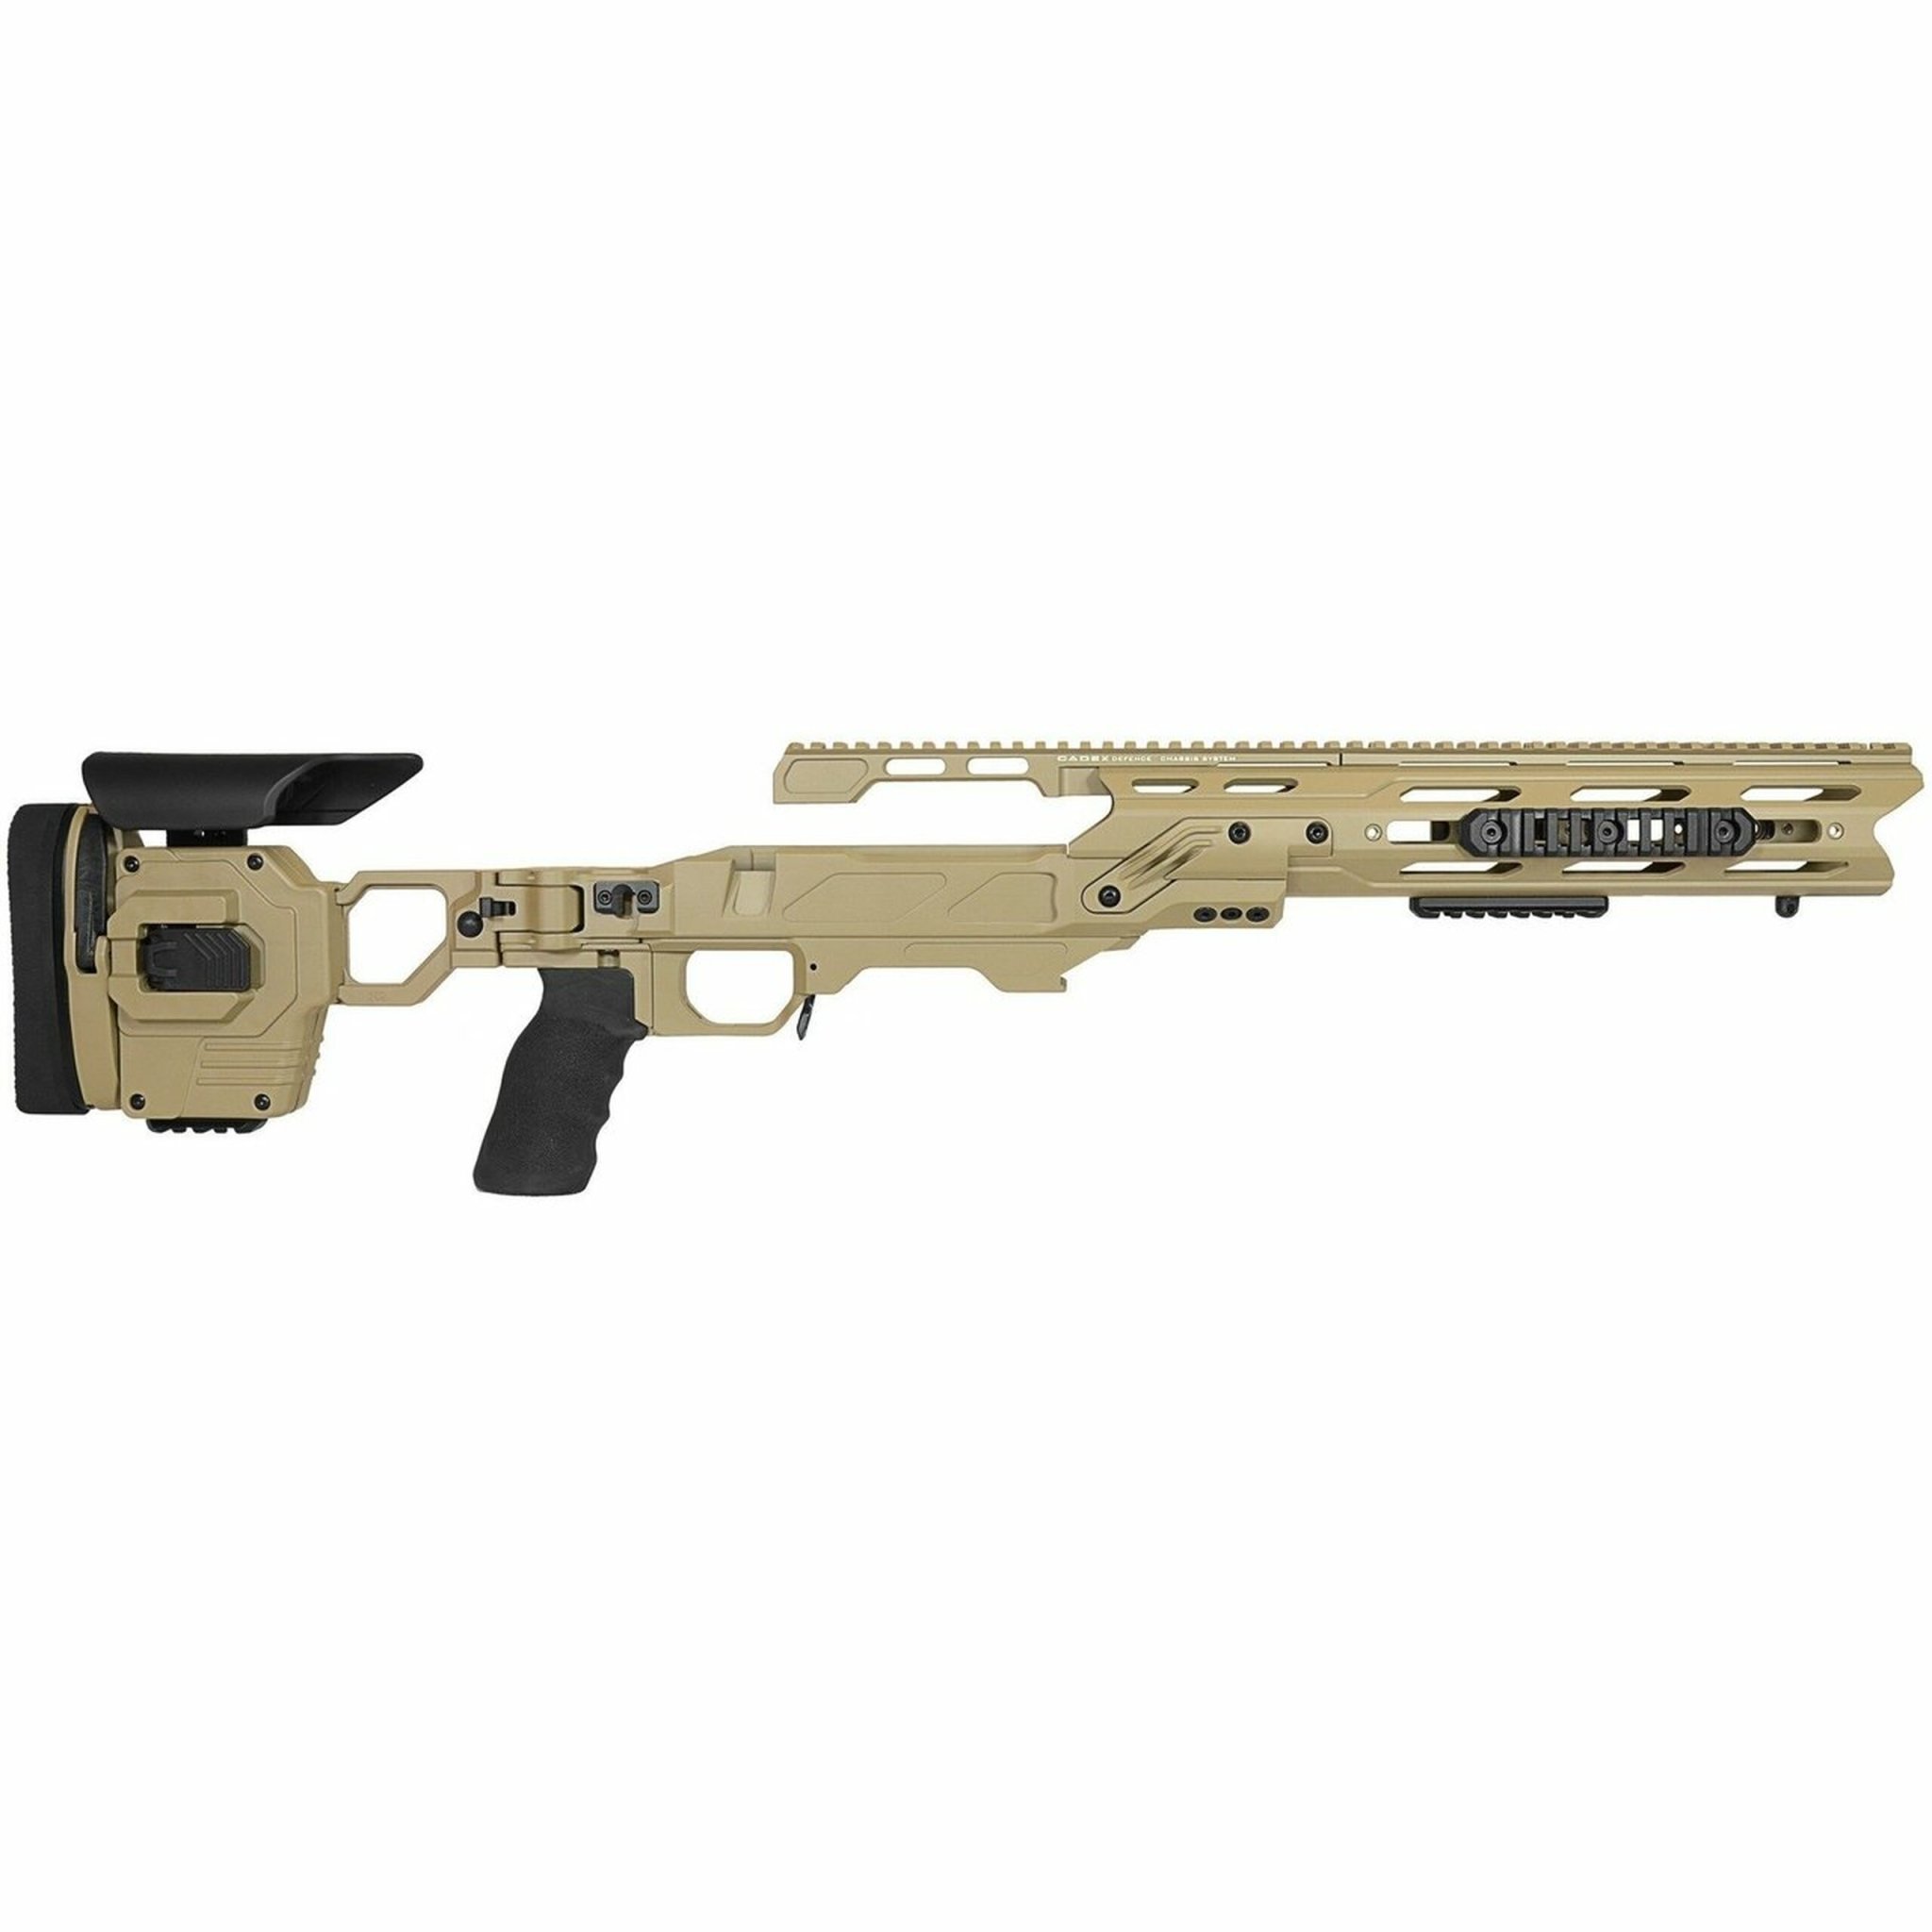 cadex-precision-rifle-chassis-tan-cadex-dual-strike-50-cal-chassis-for-mcmillan-tac-50-receive...jpg